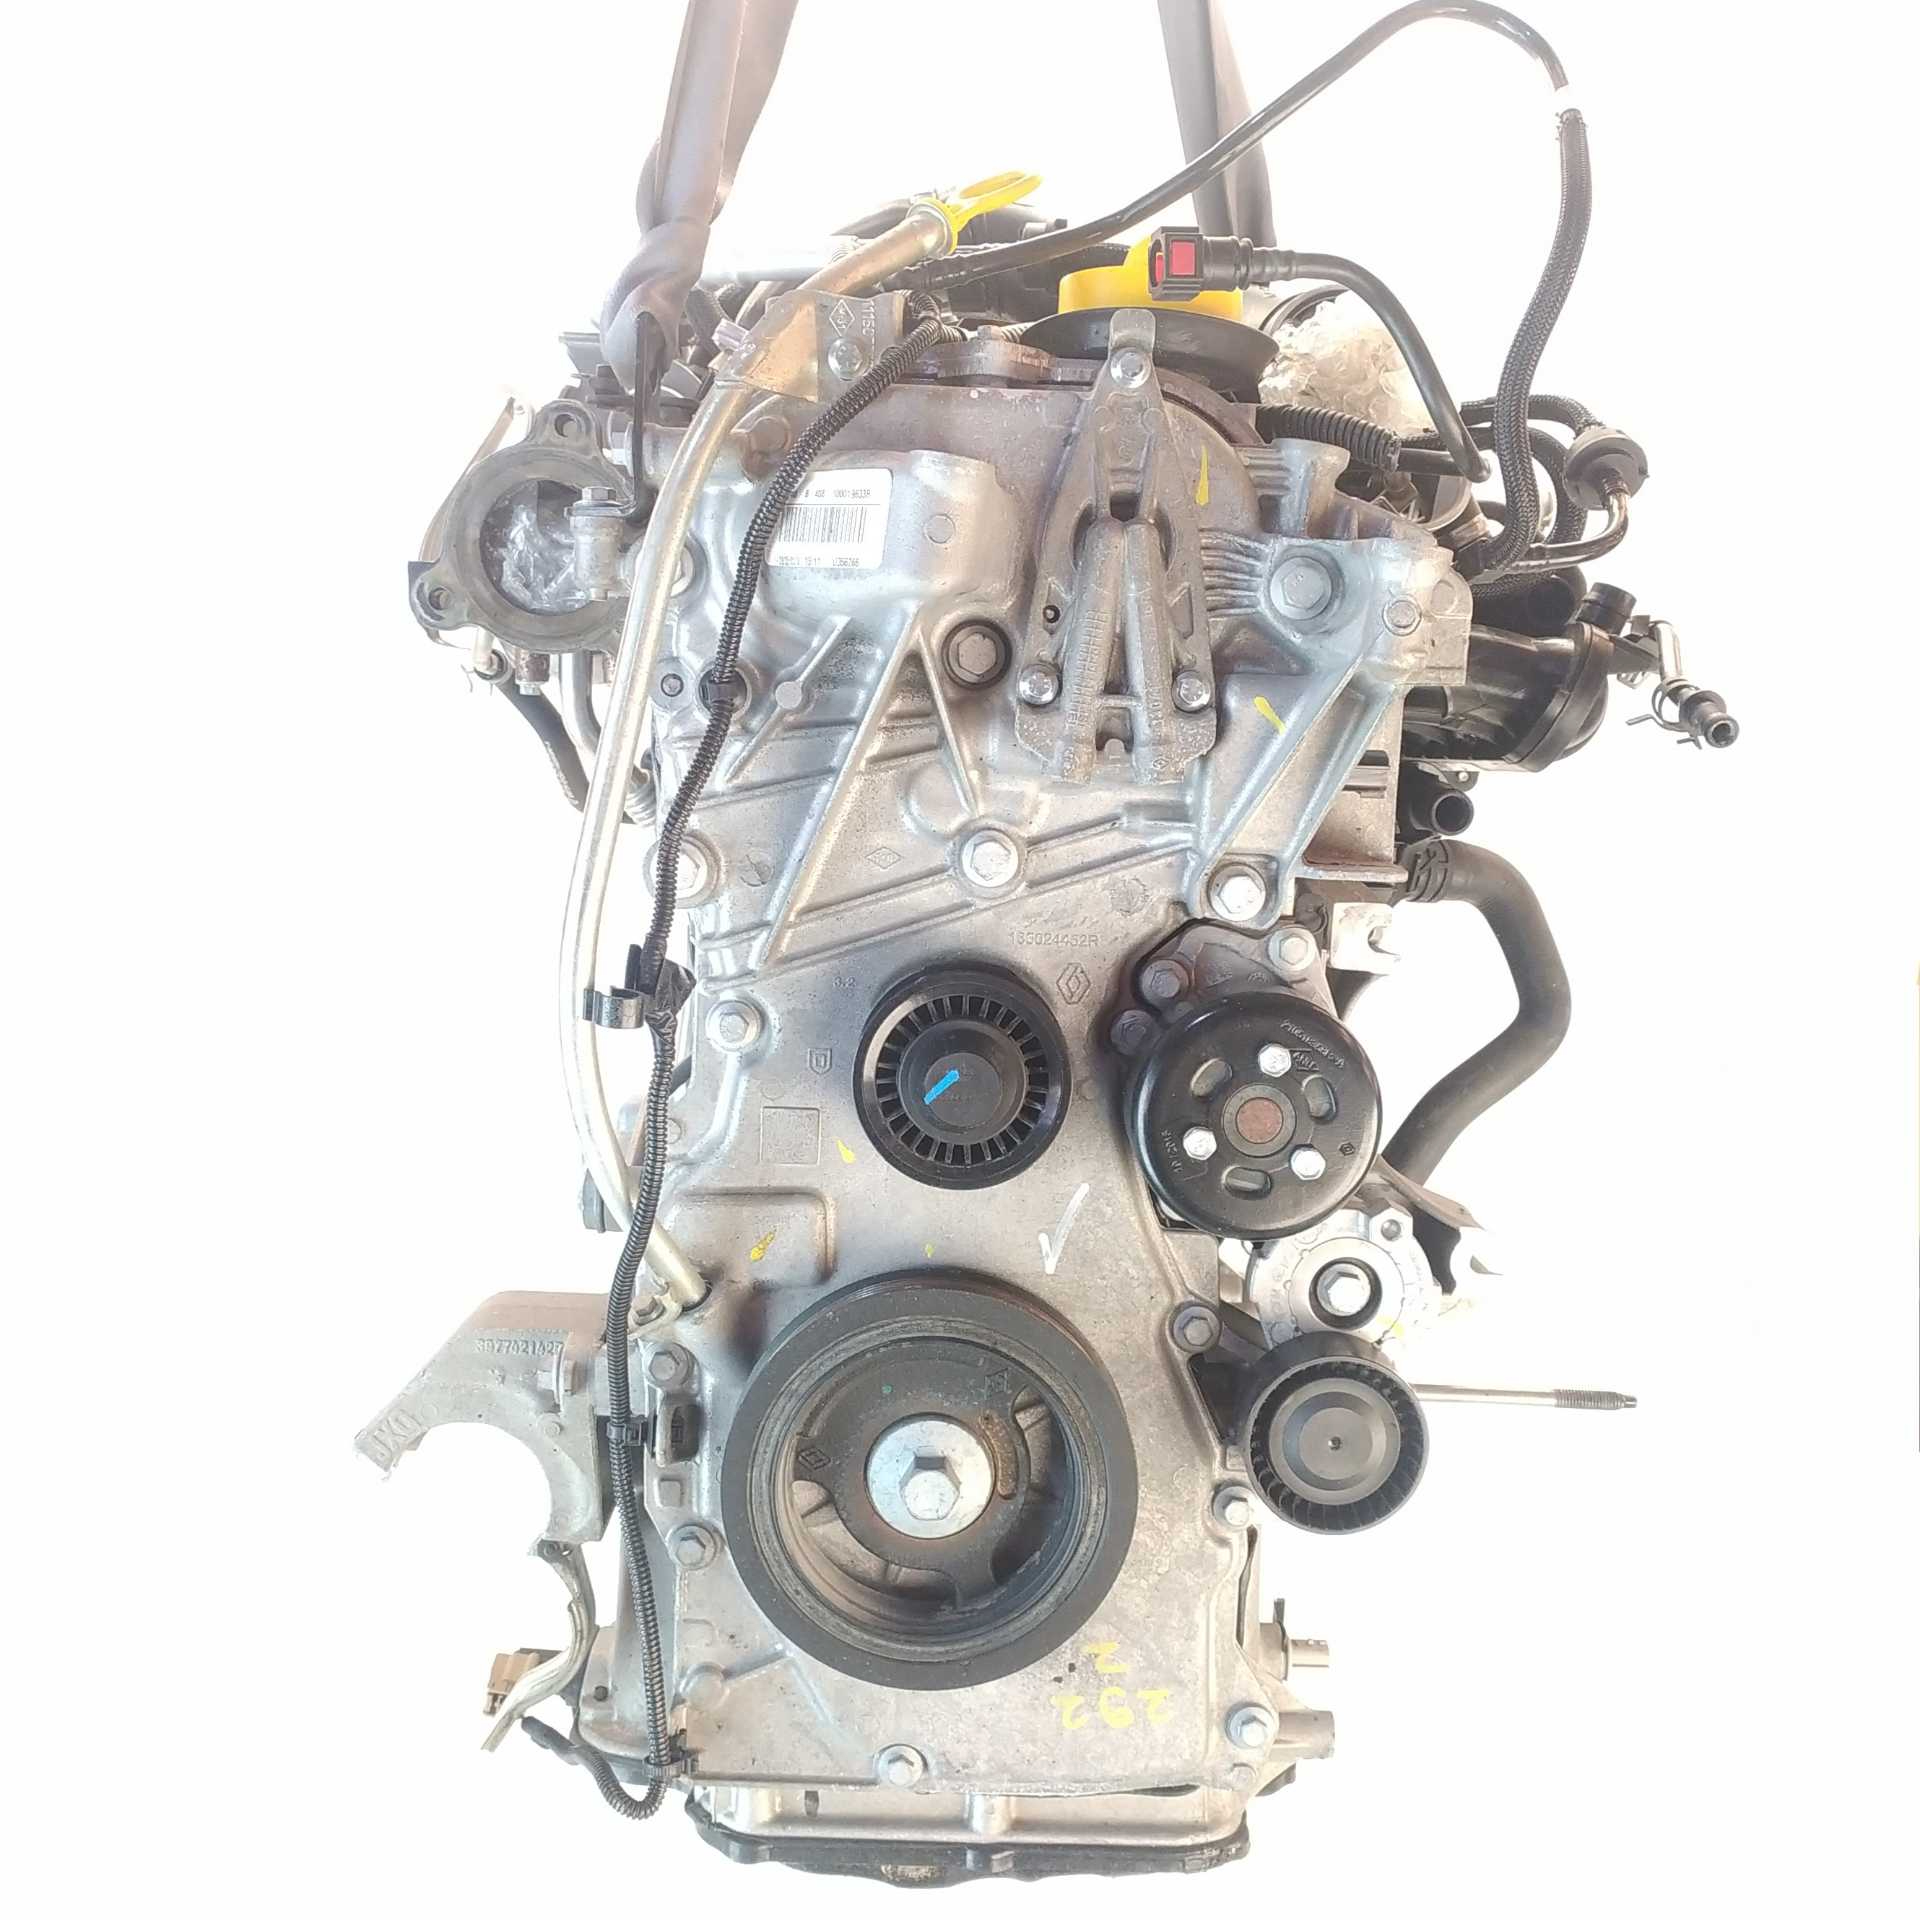 MOTOR RENAULT CLIO IV 0.9 TCe 90 (66 KW / 90 CV) (11.2012 - ...)